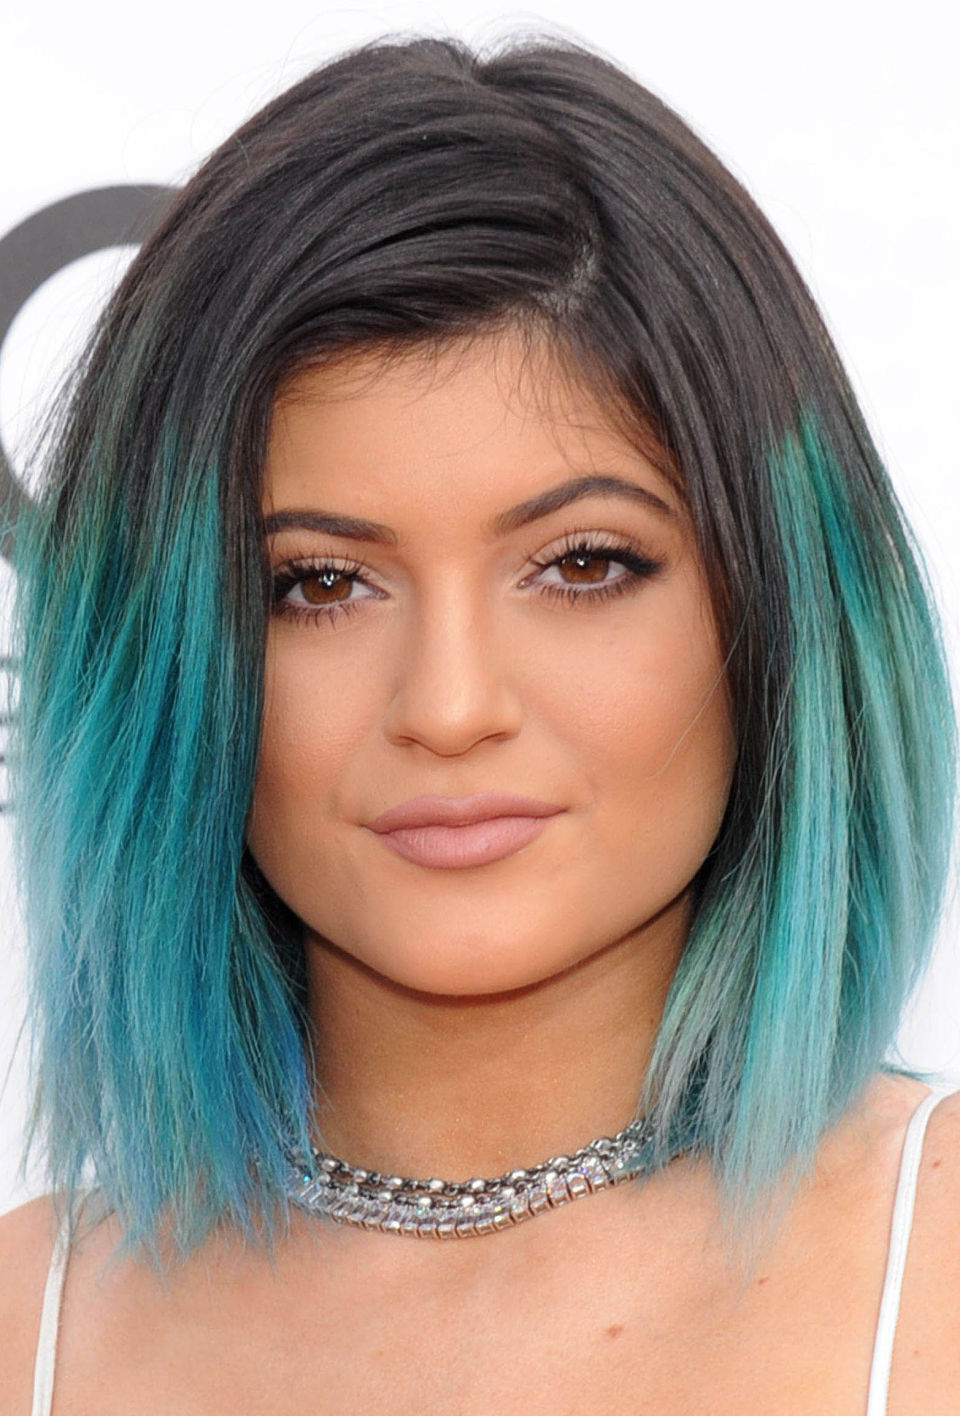 Kylie Jenner in anul 2014